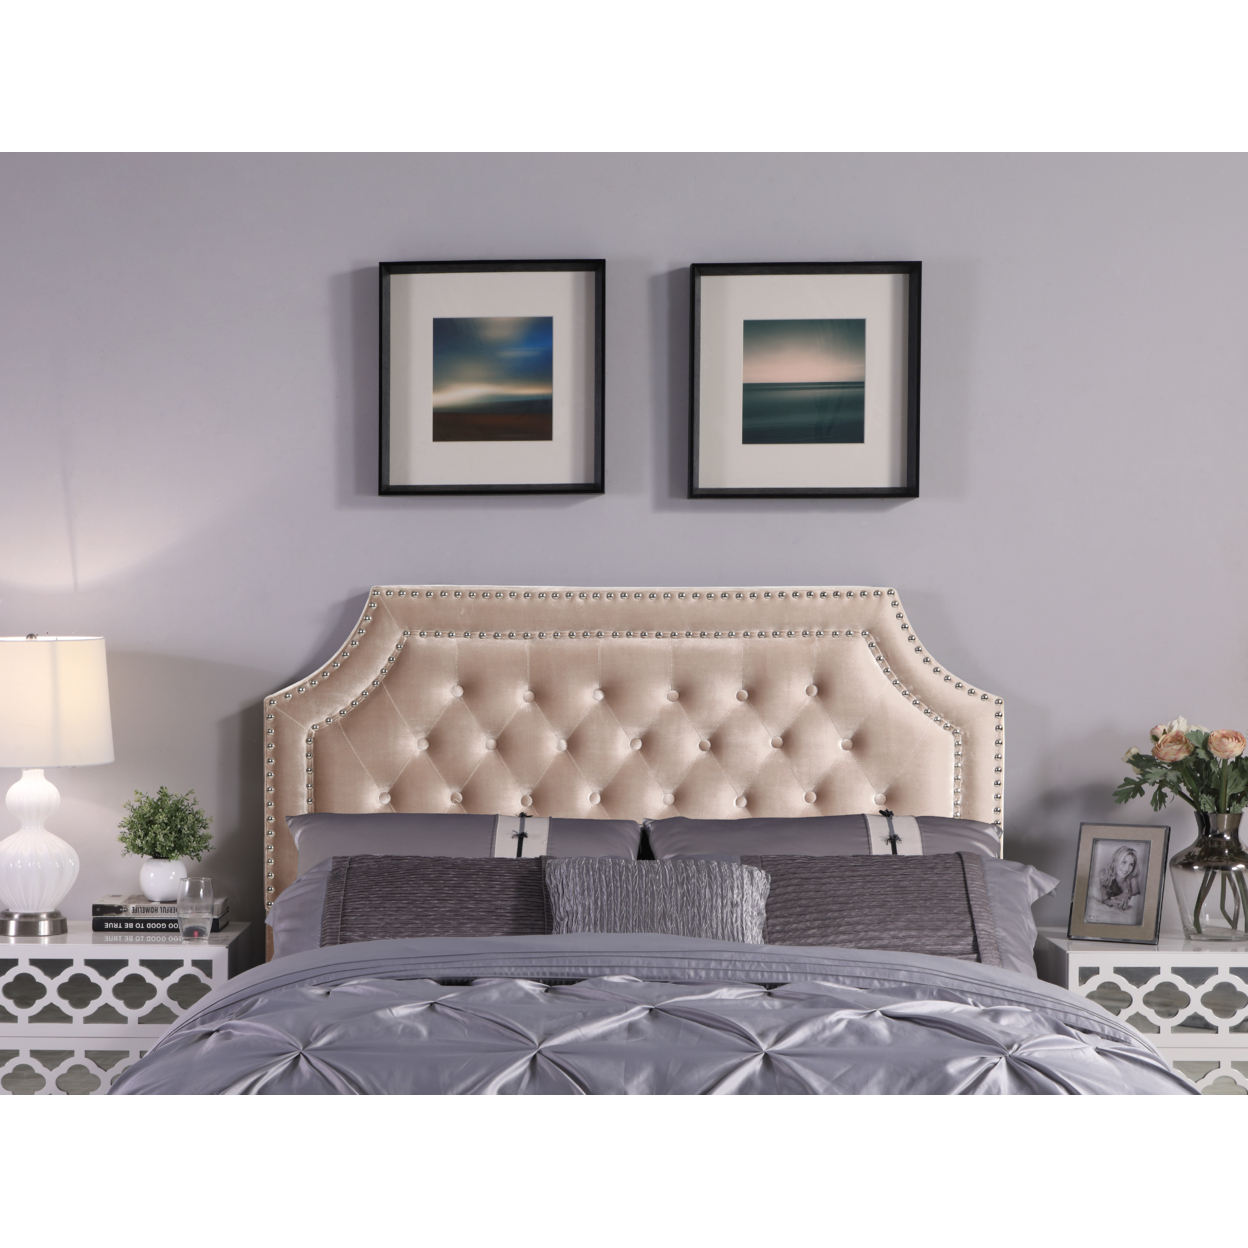 Horus Headboard Velvet Upholstered Button Tufted Double Row Silver Nailhead Trim - Taupe, Twin